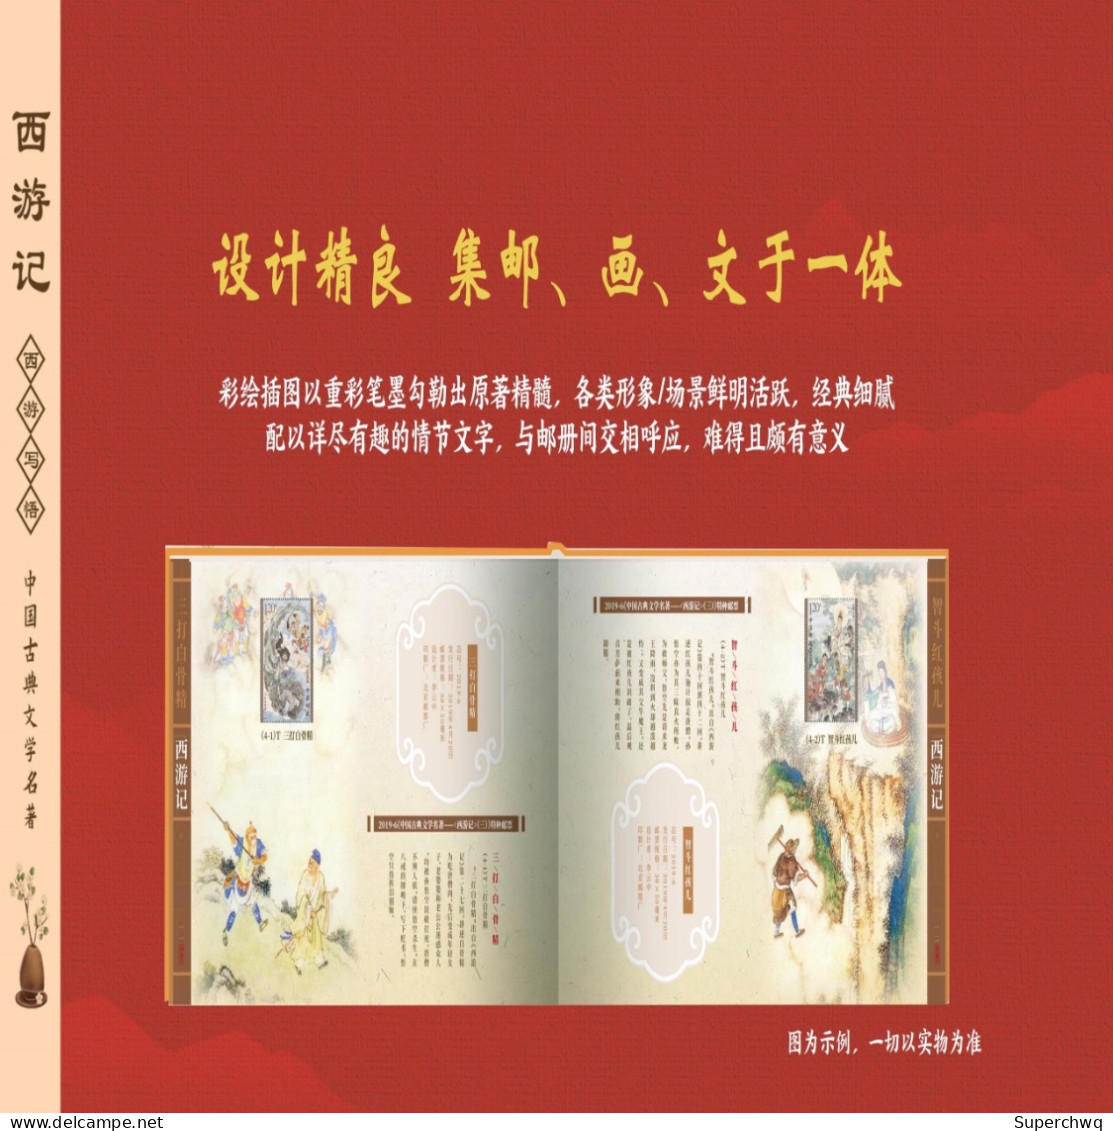 China Stamp Collection of "Four Great Classical Novels" Issued by China Philatelic Co., Ltd